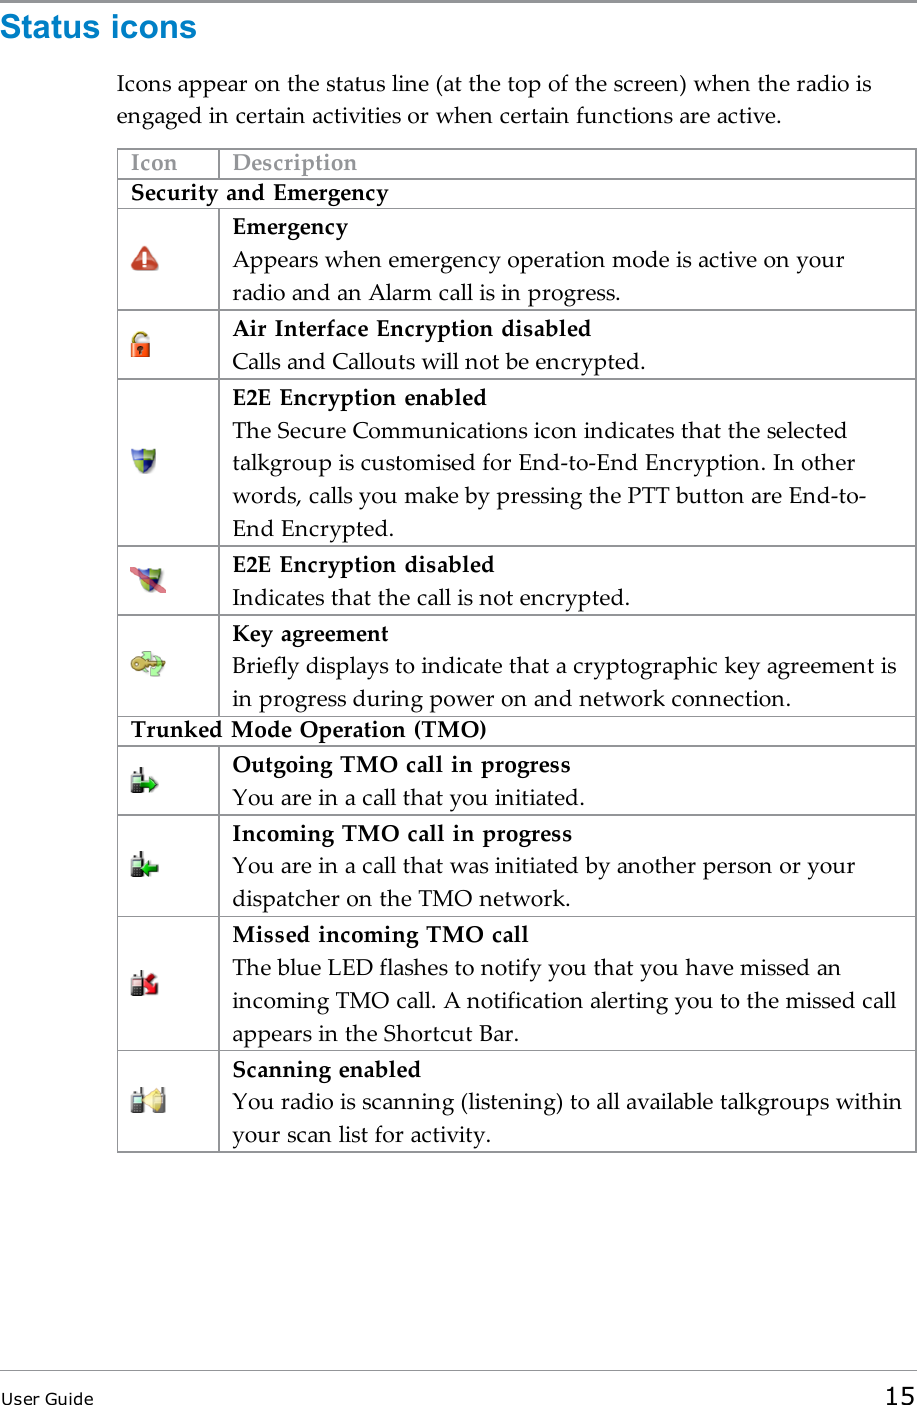 Status iconsIcons appear on the status line (at the top of the screen) when the radio isengaged in certain activities or when certain functions are active.Icon DescriptionSecurity and EmergencyEmergencyAppears when emergency operation mode is active on yourradio and an Alarm call is in progress.Air Interface Encryption disabledCalls and Callouts will not be encrypted.E2E Encryption enabledThe Secure Communications icon indicates that the selectedtalkgroup is customised for End-to-End Encryption. In otherwords, calls you make by pressing the PTT button are End-to-End Encrypted.E2E Encryption disabledIndicates that the call is not encrypted.Key agreementBriefly displays to indicate that a cryptographic key agreement isin progress during power on and network connection.Trunked Mode Operation (TMO)Outgoing TMOcall in progressYou are in a call that you initiated.Incoming TMO call in progressYou are in a call that was initiated by another person or yourdispatcher on the TMO network.Missed incoming TMO callThe blue LEDflashes to notify you that you have missed anincoming TMO call. A notification alerting you to the missed callappears in the Shortcut Bar.Scanning enabledYou radio is scanning (listening) to all available talkgroups withinyour scan list for activity.User Guide 15